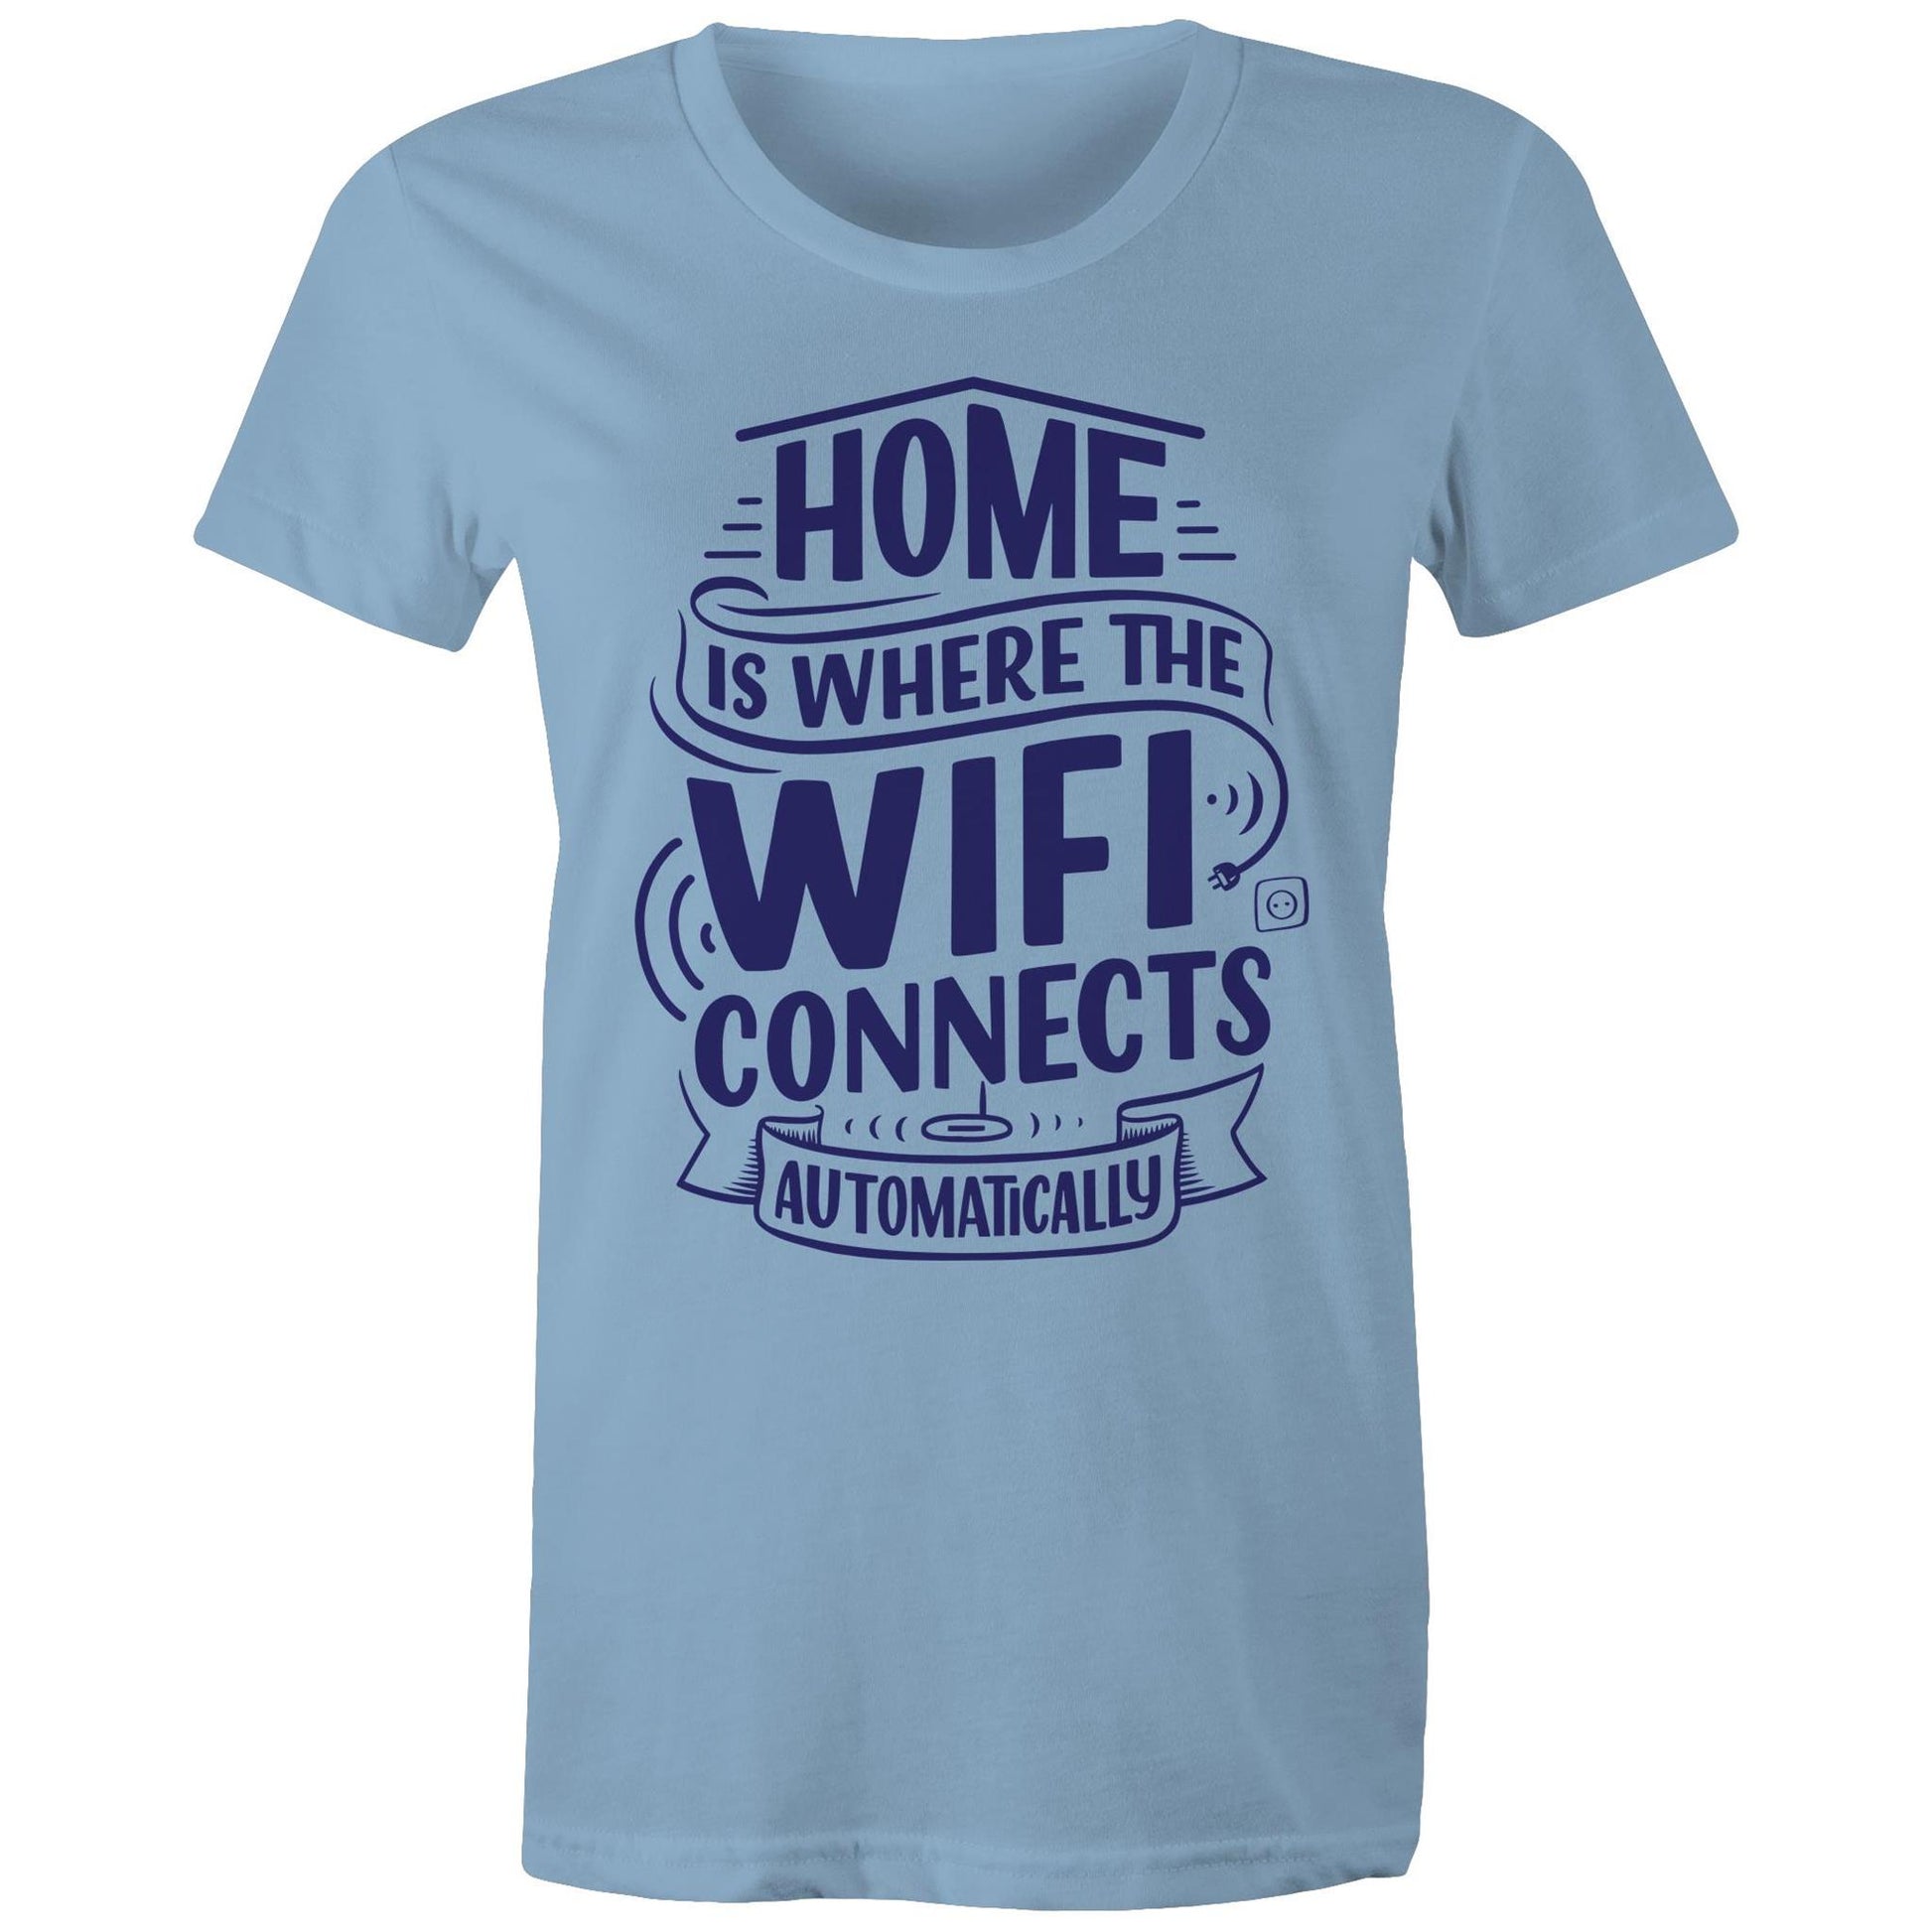 Home Is Where The WIFI Connects Automatically - Womens T-shirt Carolina Blue Womens T-shirt Tech